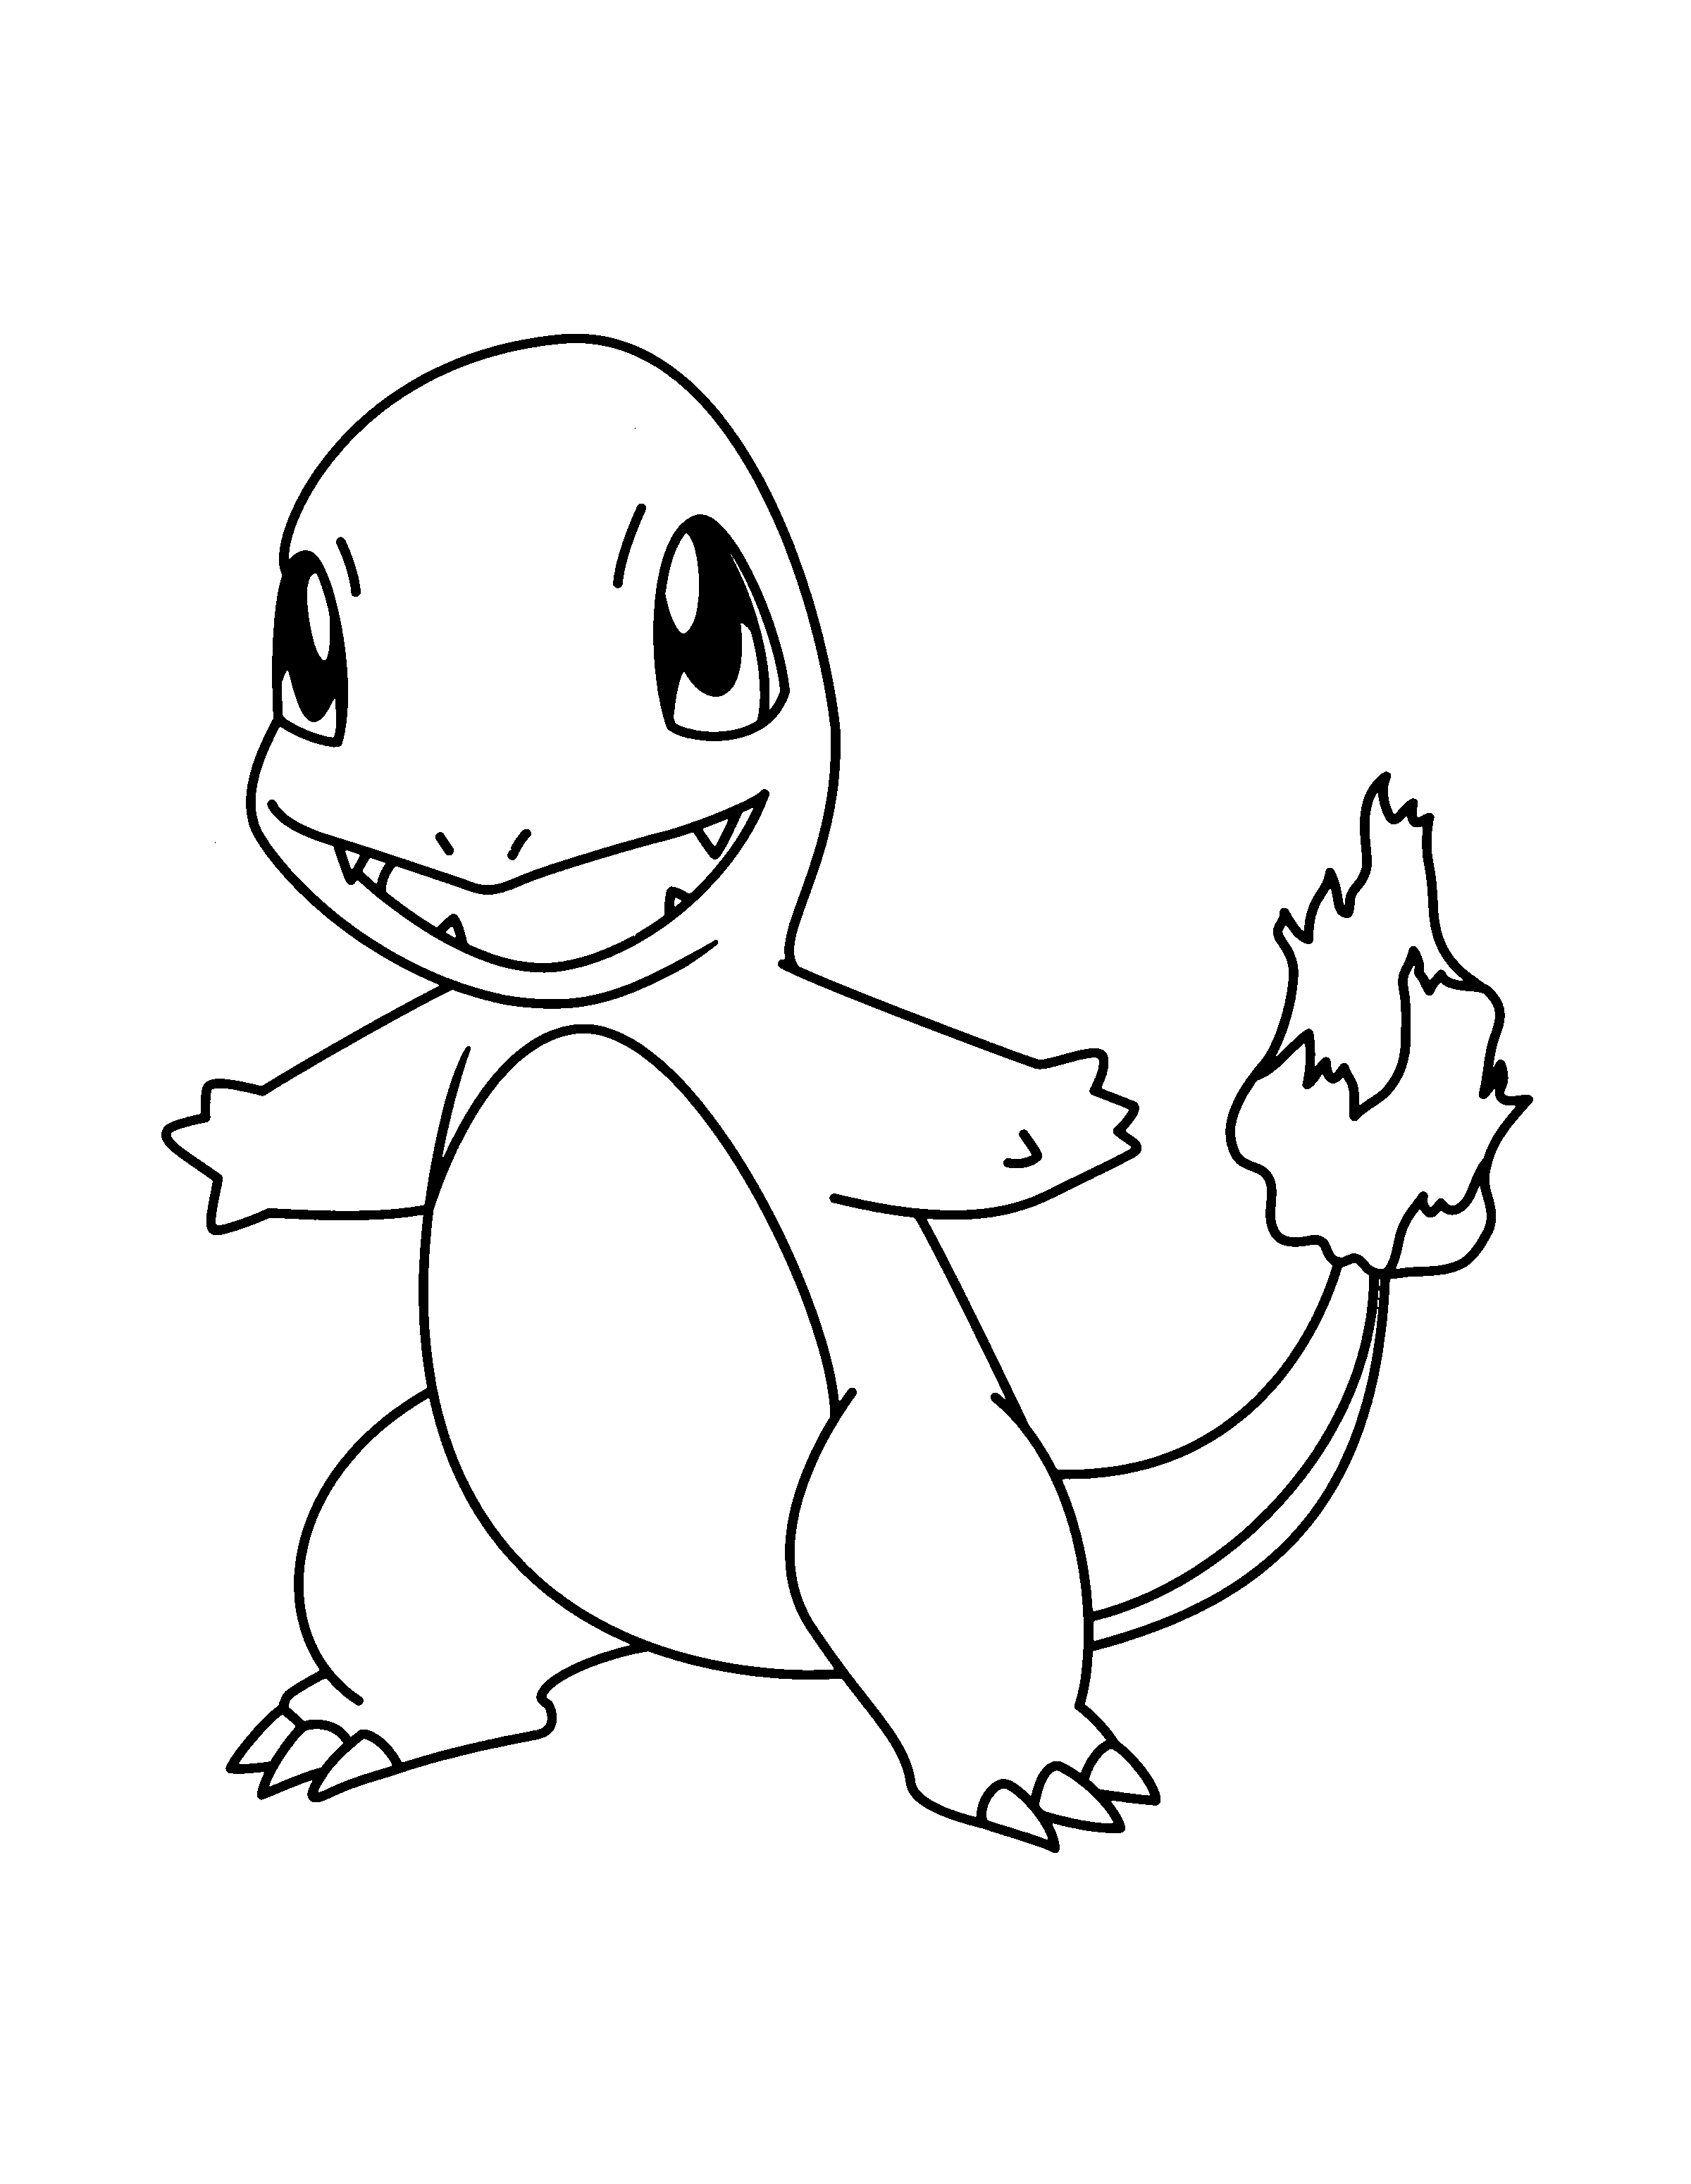 Coloring Page Pokemon Advanced Coloring Pages 23 Pokemon Coloring Pages Pokemon Color